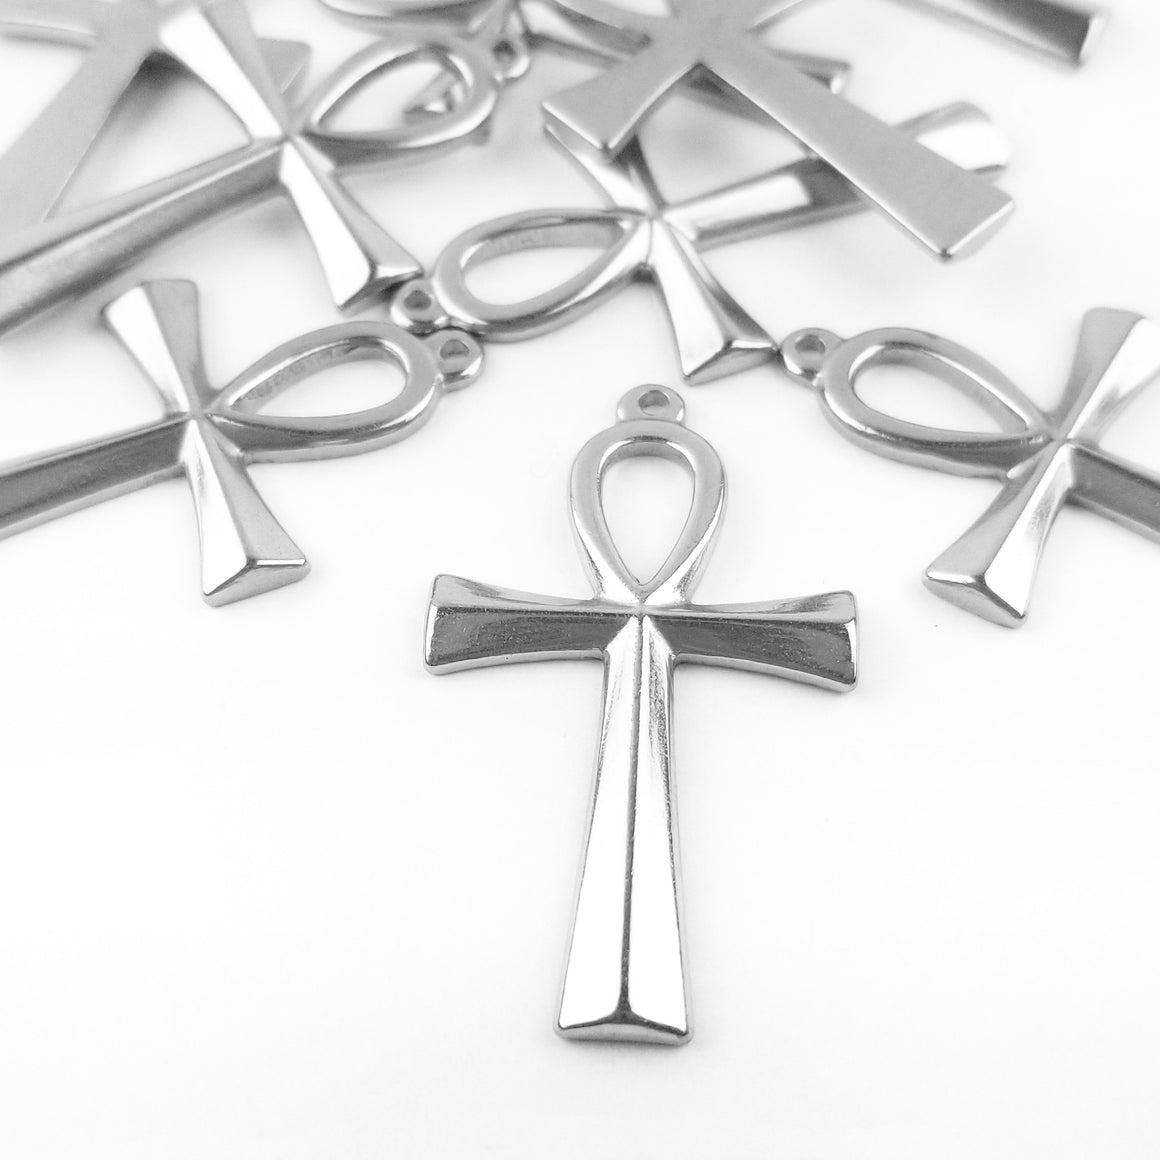 54 FLORAL ANKH CRUCIFIX CROSS PENDANT NECKLACE CHAIN - SILVER